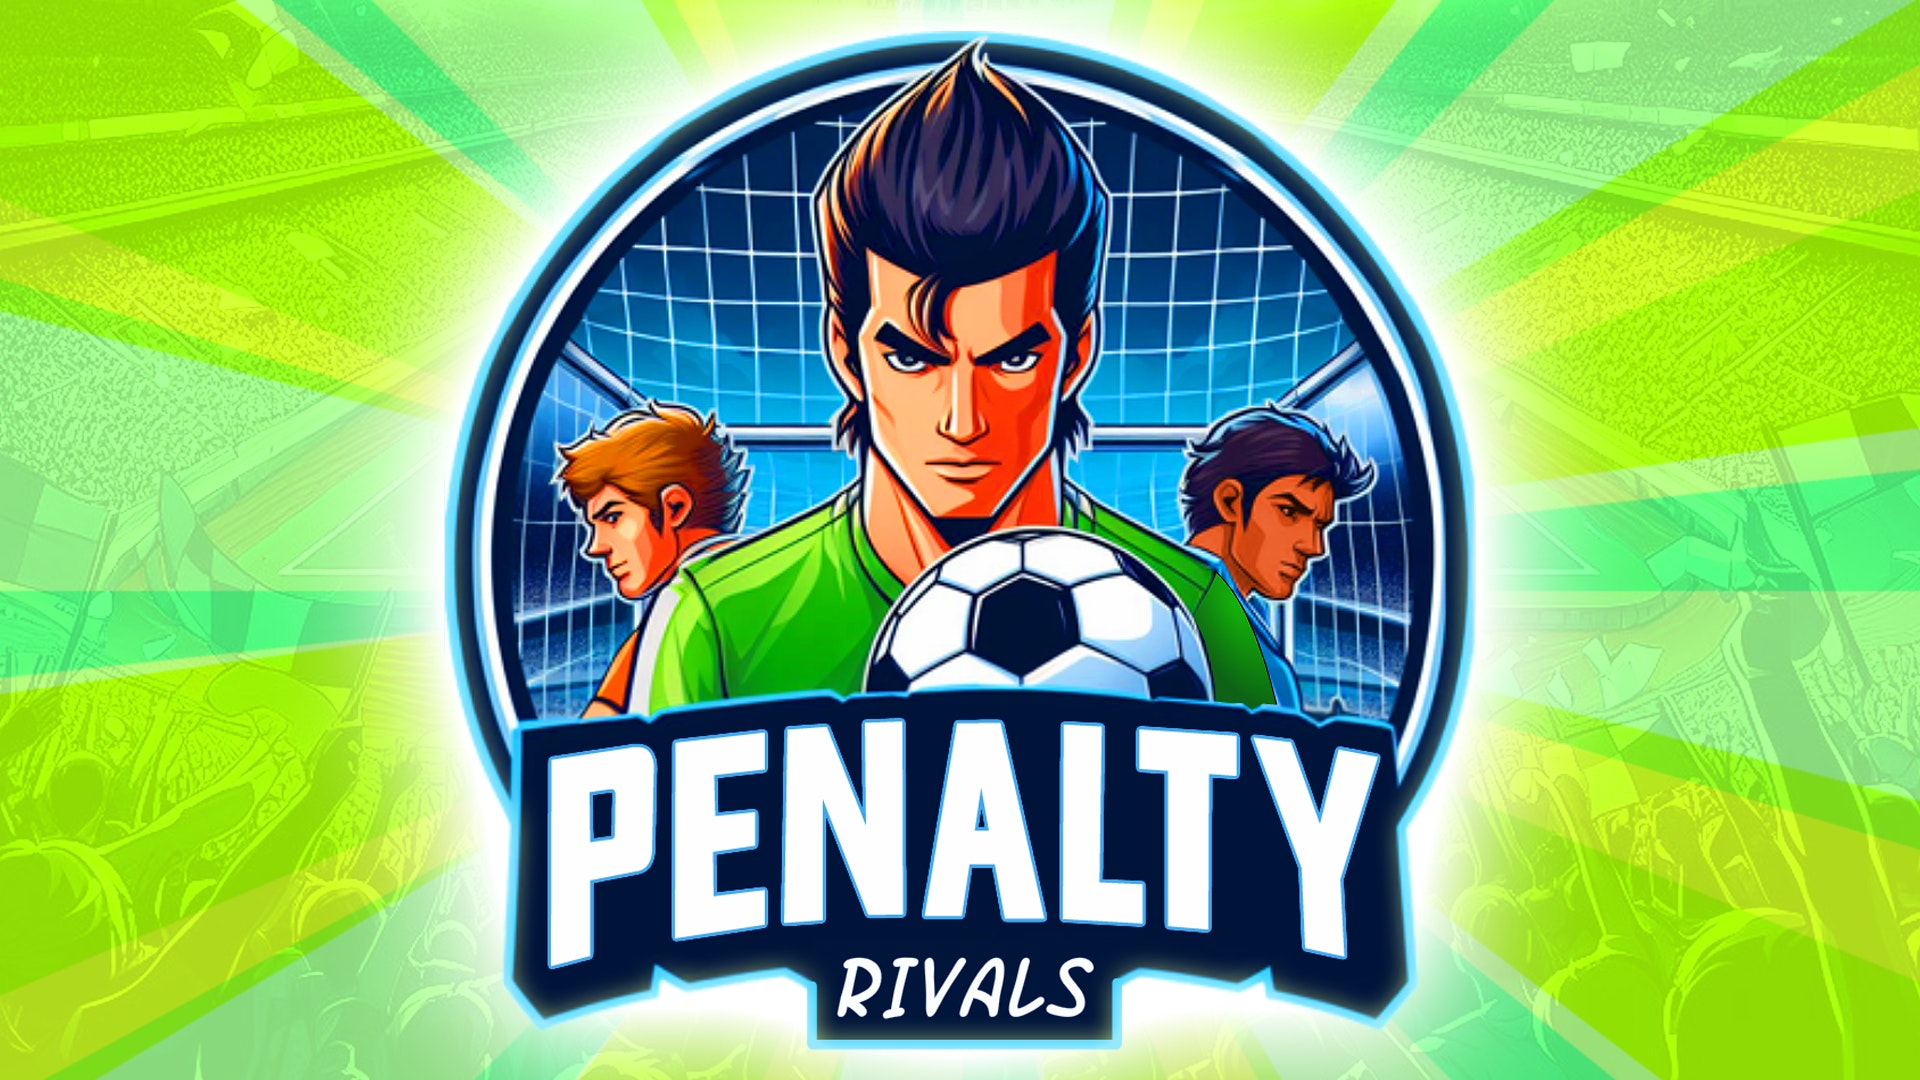 A Small World Cup 🕹️ Play on CrazyGames